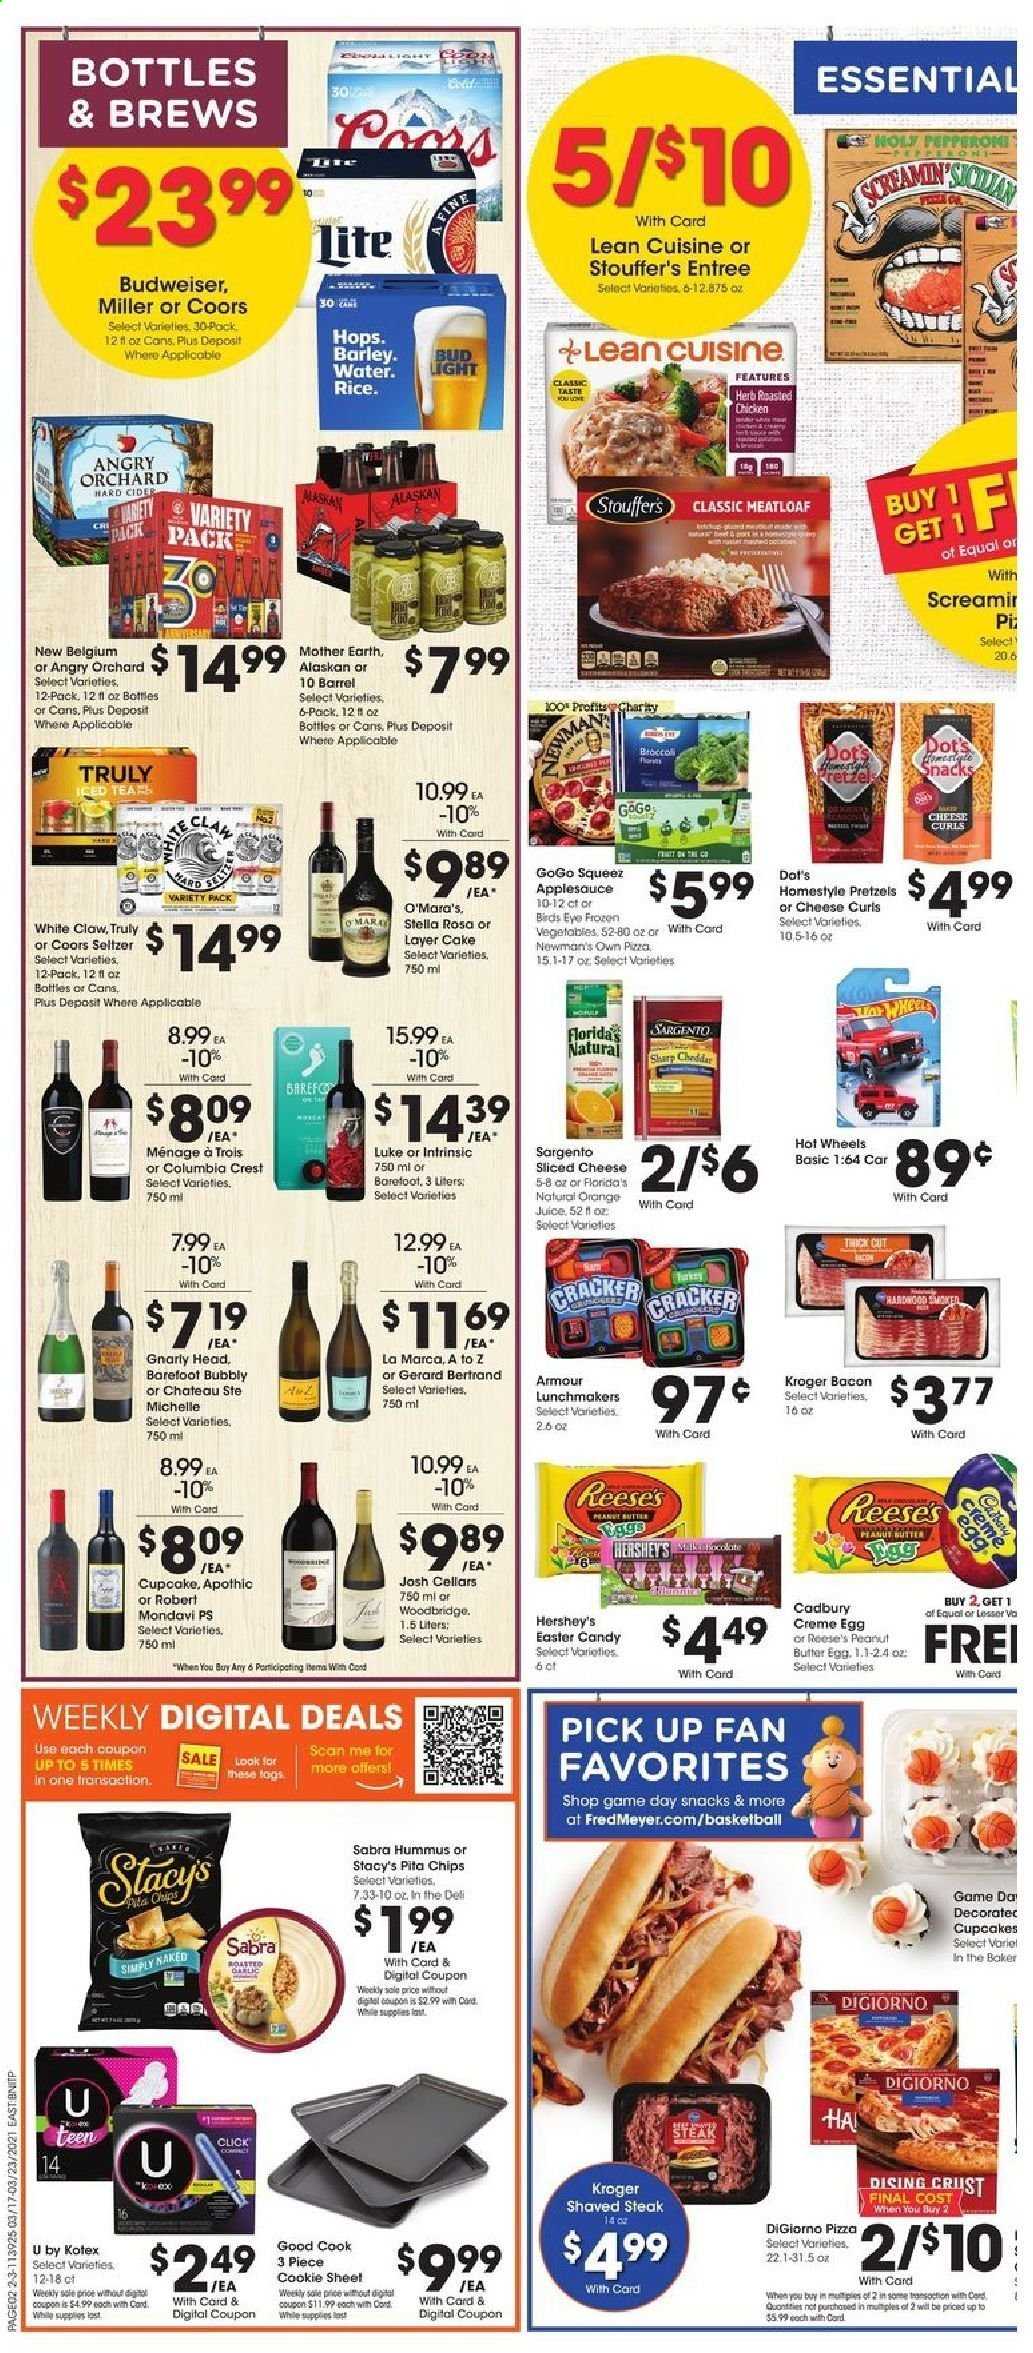 thumbnail - Fred Meyer Flyer - 03/17/2021 - 03/23/2021 - Sales products - Budweiser, Coors, pretzels, cupcake, cake, pizza, meatloaf, Bird's Eye, Lean Cuisine, bacon, hummus, sliced cheese, Sargento, Reese's, Hershey's, frozen vegetables, Stouffer's, crackers, Cadbury, Mother Earth, Florida's Natural, snack, herbs, apple sauce, juice, seltzer water, wine, Woodbridge, apple cider, White Claw, TRULY, beer, Bud Light, Miller, steak, Crest, Kotex, Hot Wheels. Page 2.